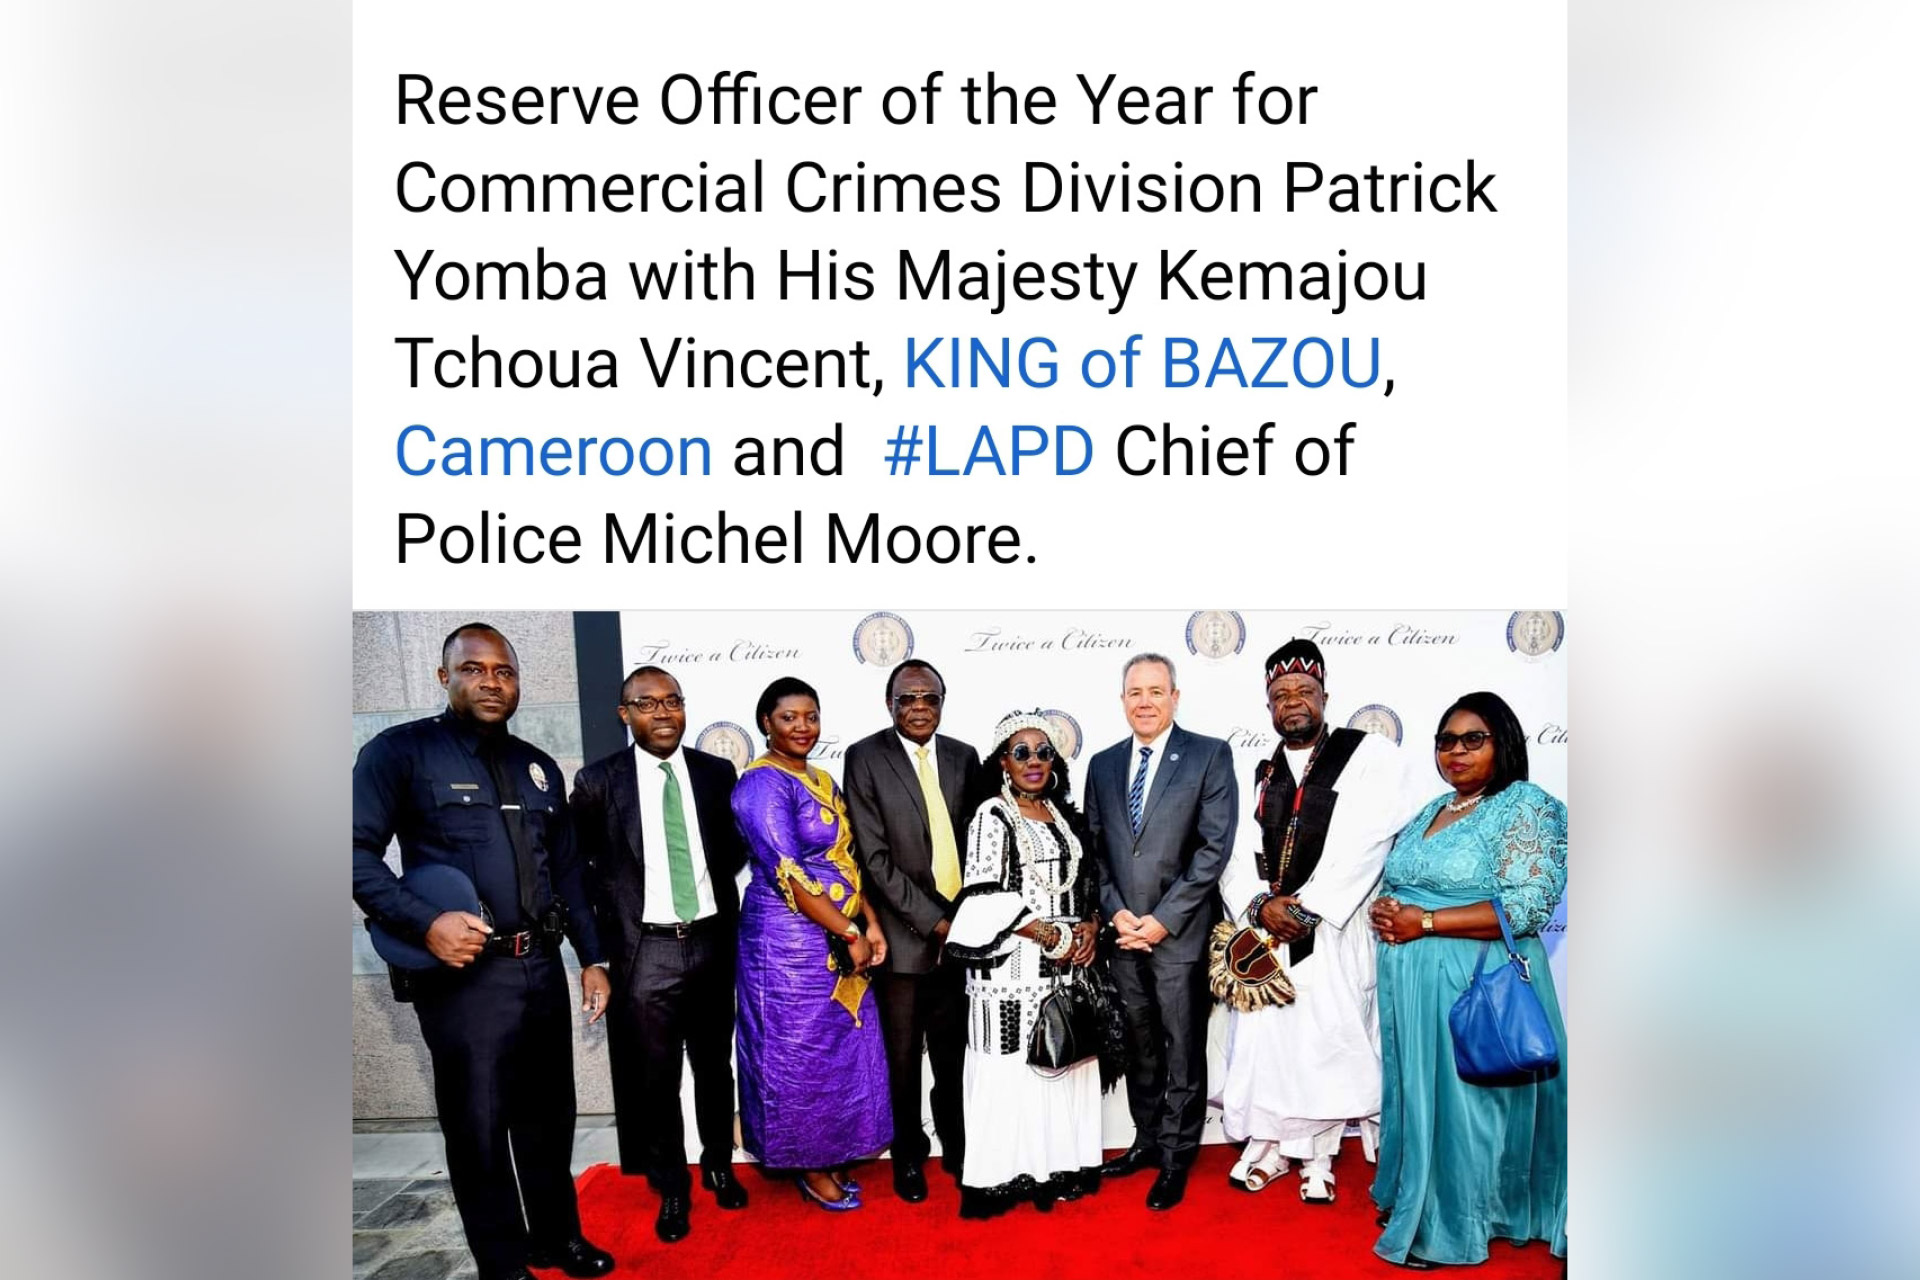 twice-a-citizen-2024-5-Patrick-Yomba-with-His-Majesty-Kemajou-Tchoua-Vincent-King-of-Bazou-Cameroon-and-LAPD-Chief-of-Police-Michael-Moore